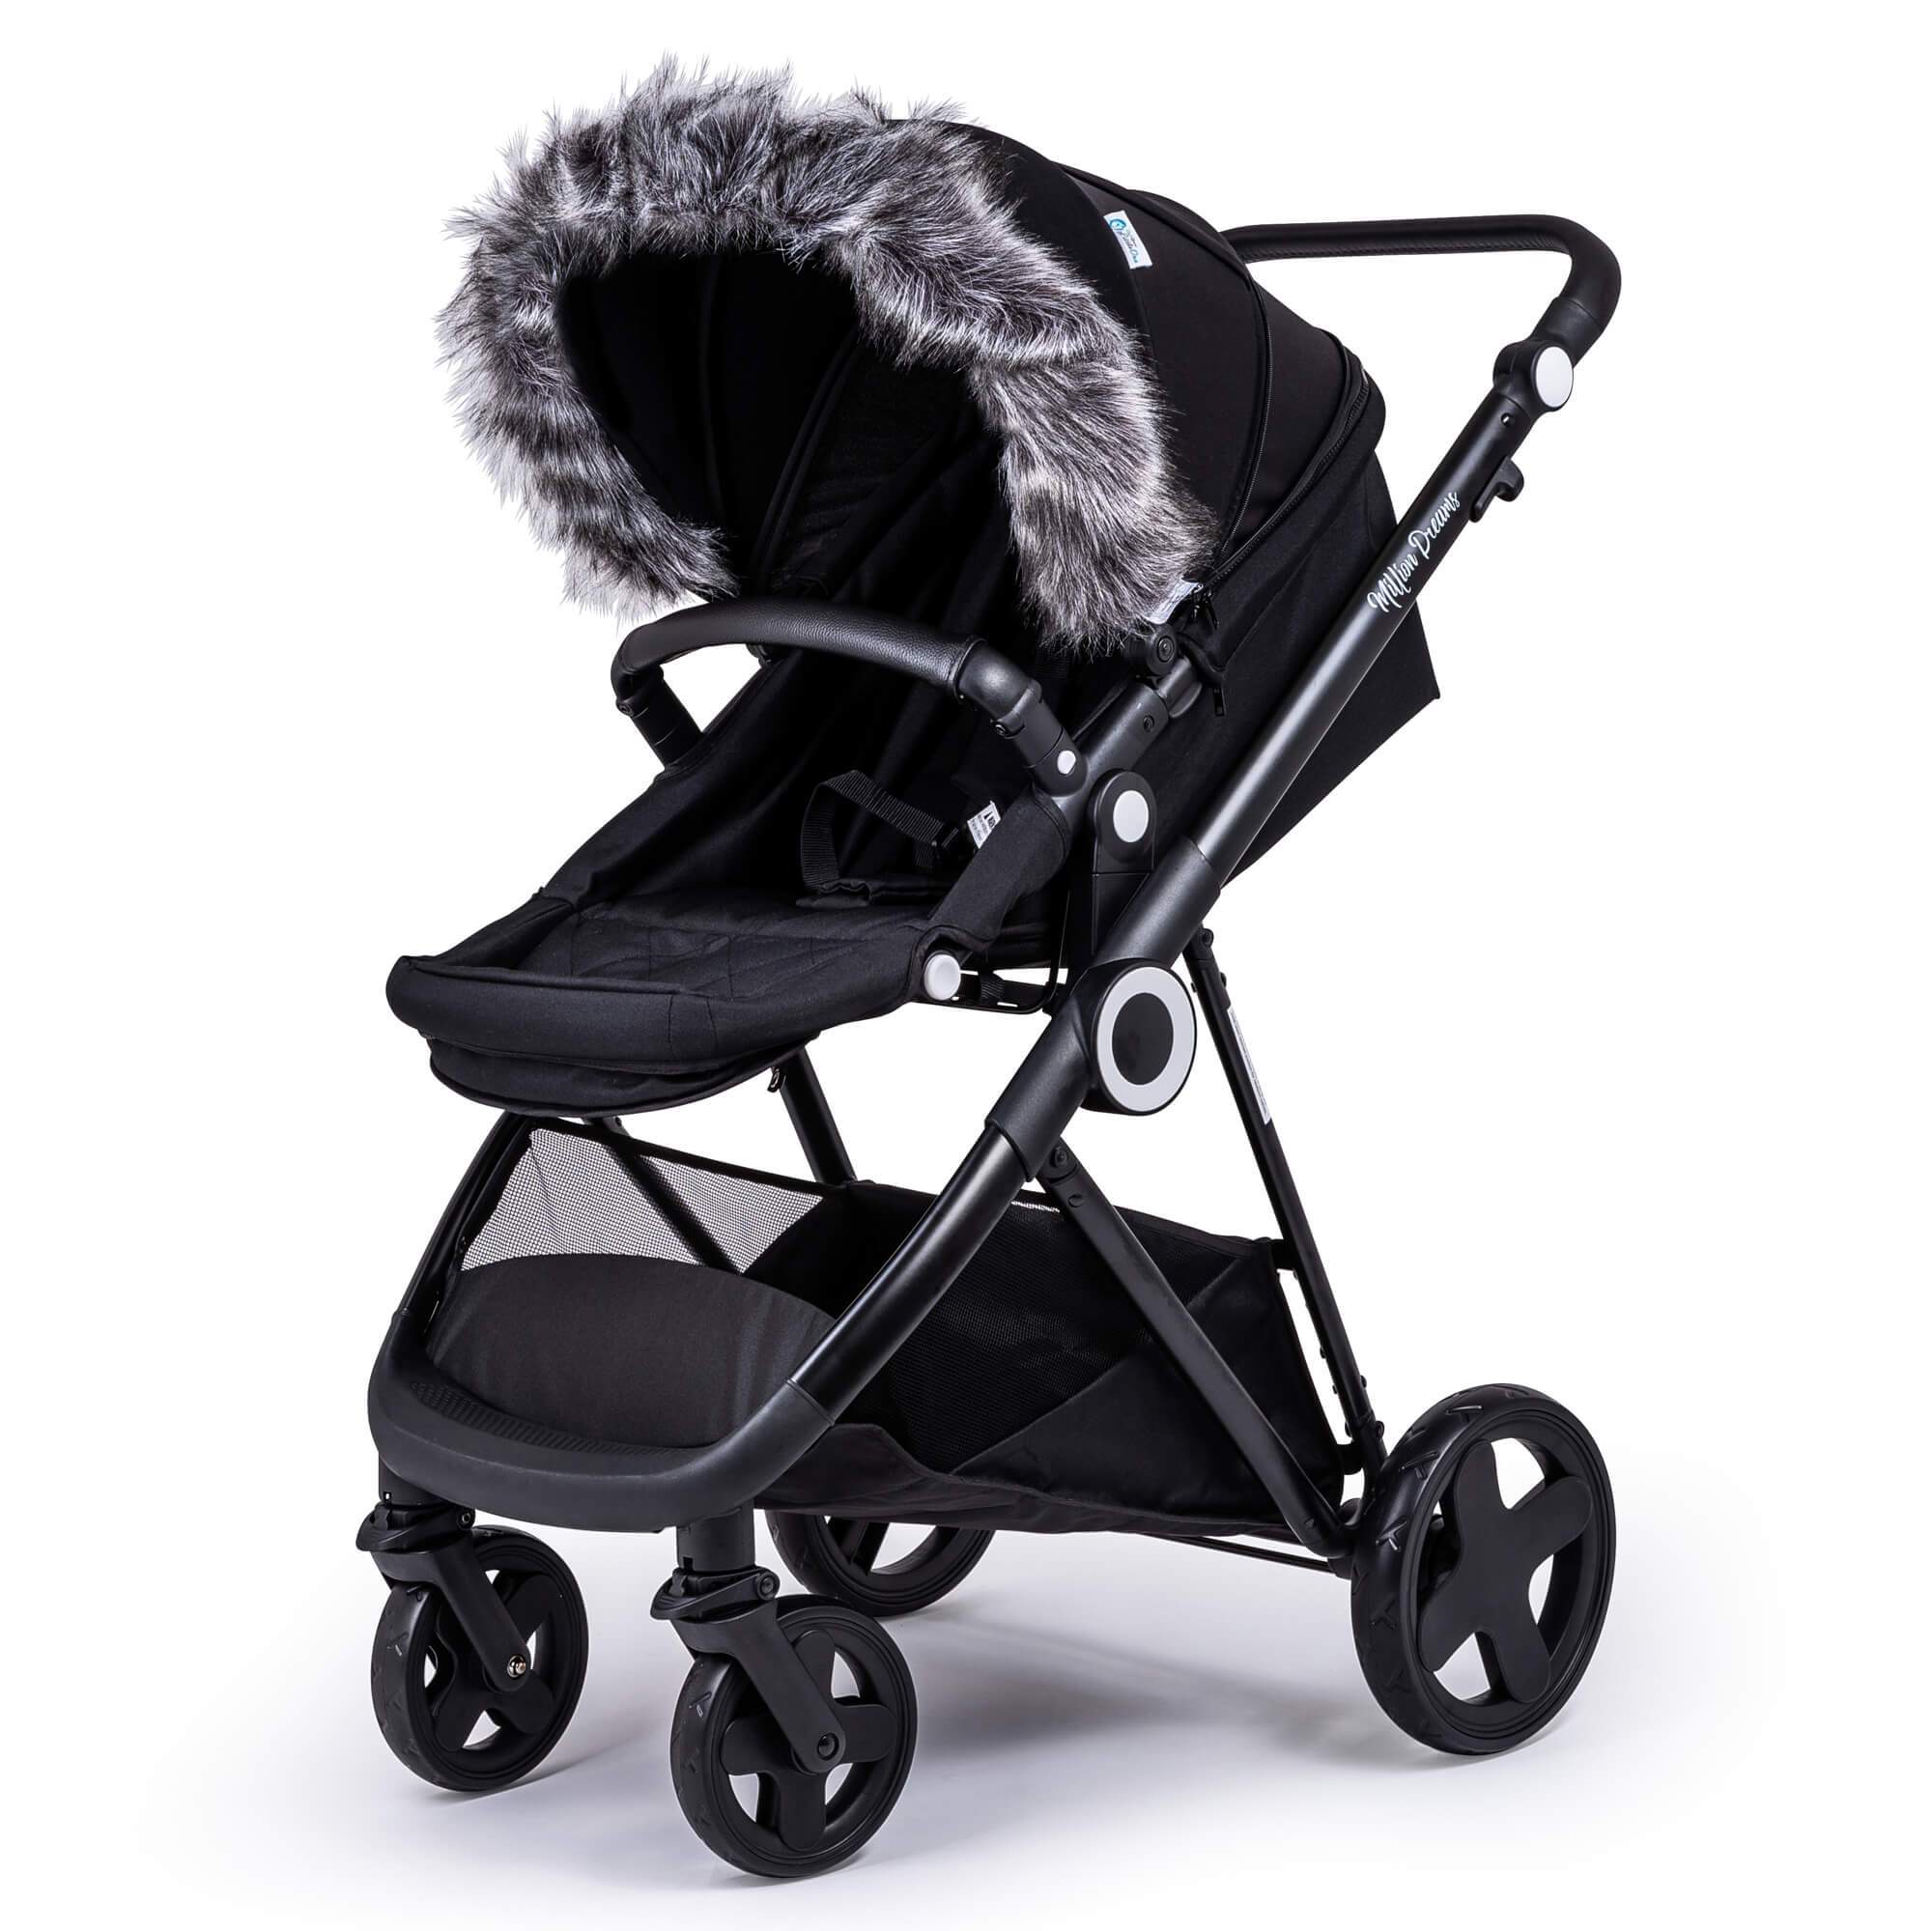 Pram Fur Hood Trim Attachment for Pushchair Compatible with Mothercare - Dark Grey / Fits All Models | For Your Little One